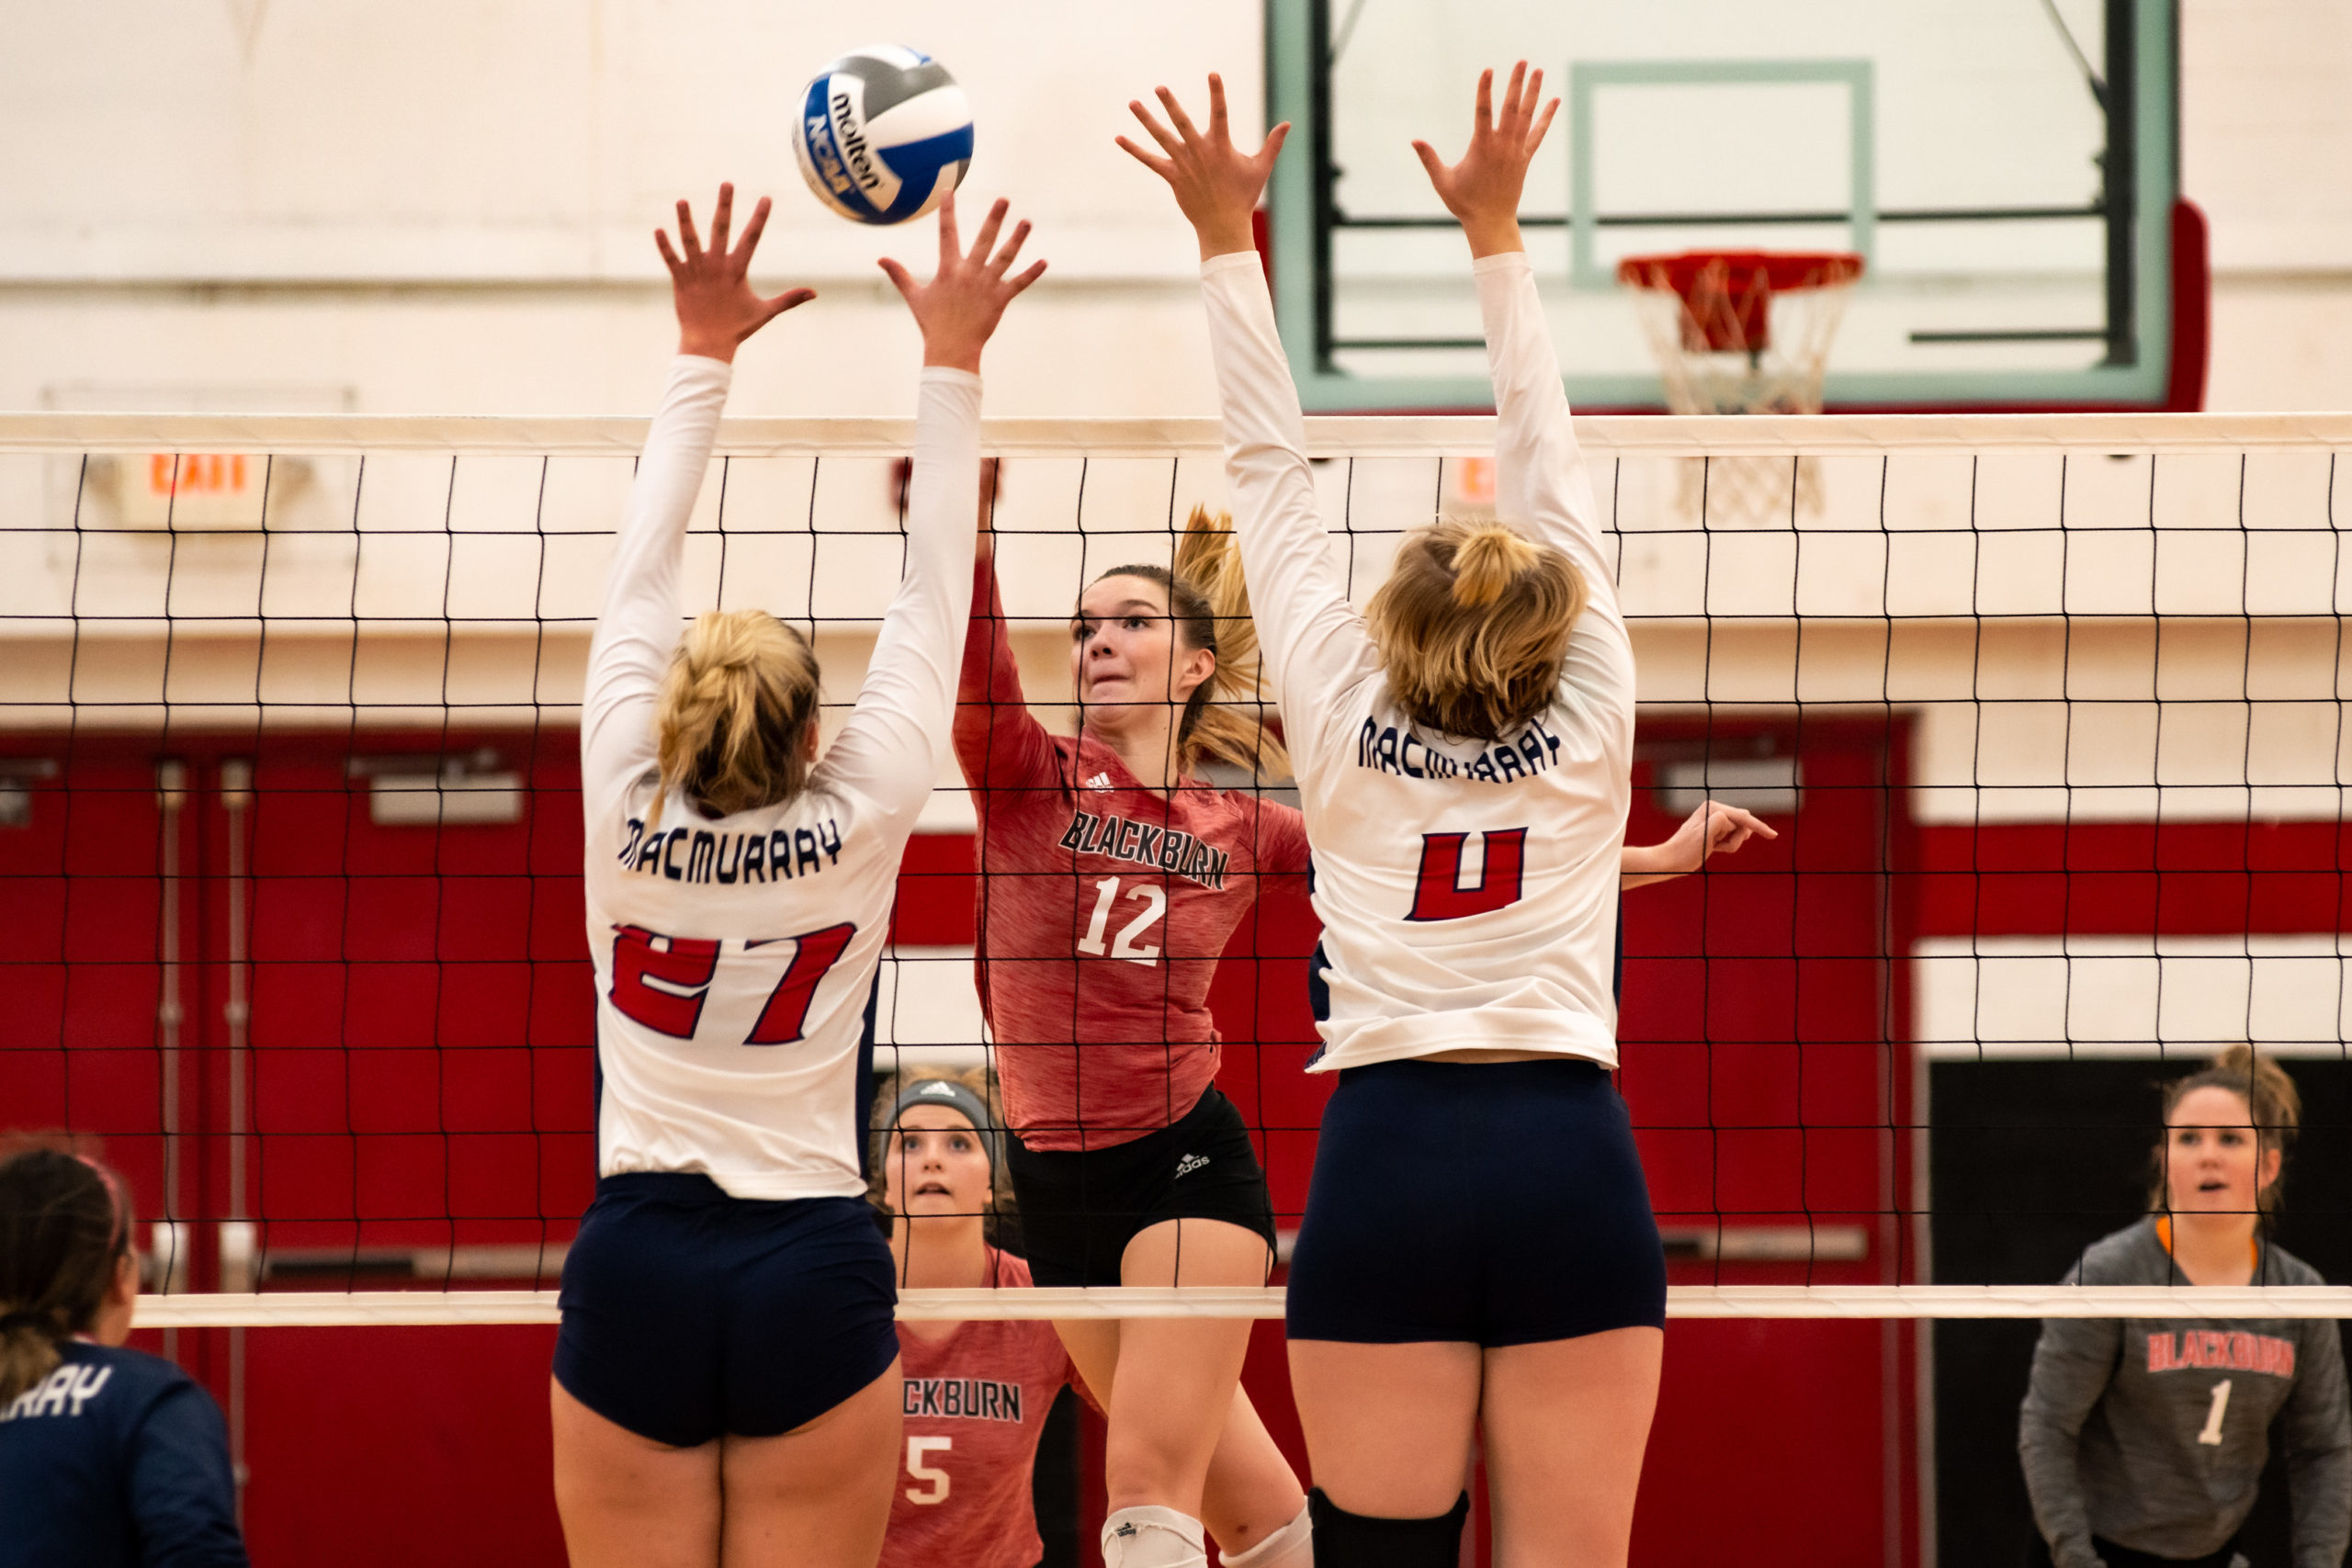 Blackburn Volleyball student-athlete tapping the ball into the adversary team's zone.